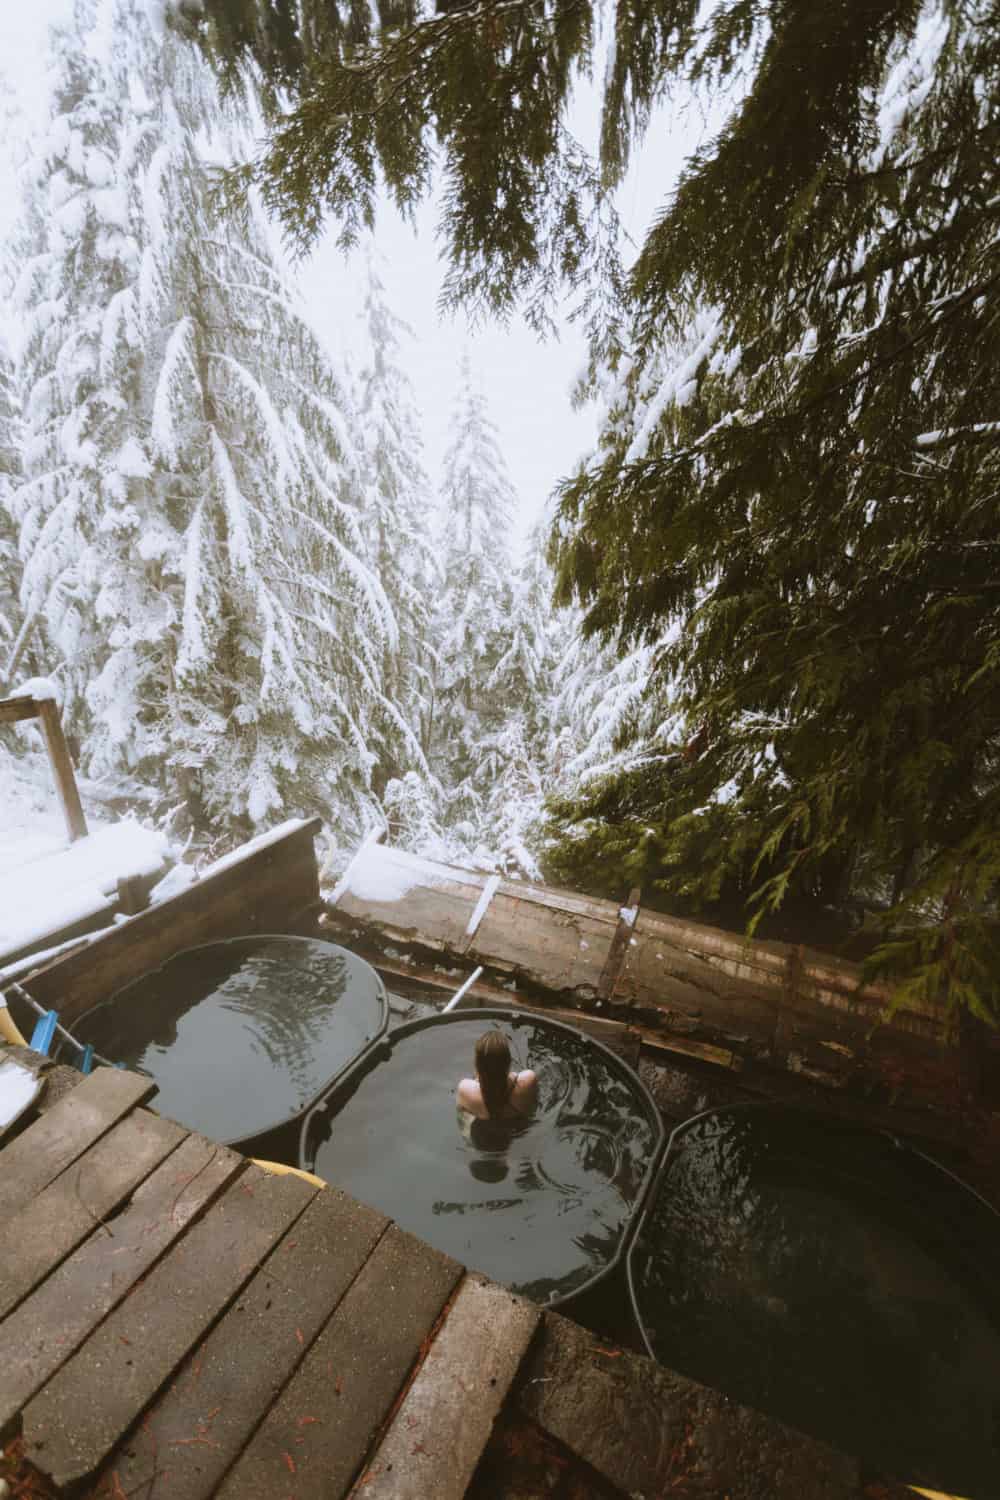 Looking for a winter getaway? Look no further that this dense-forest scenic hot springs in the cascade mountains of Washington! Read of to find out how to get here and get relaxing right away! TheMandagies.com